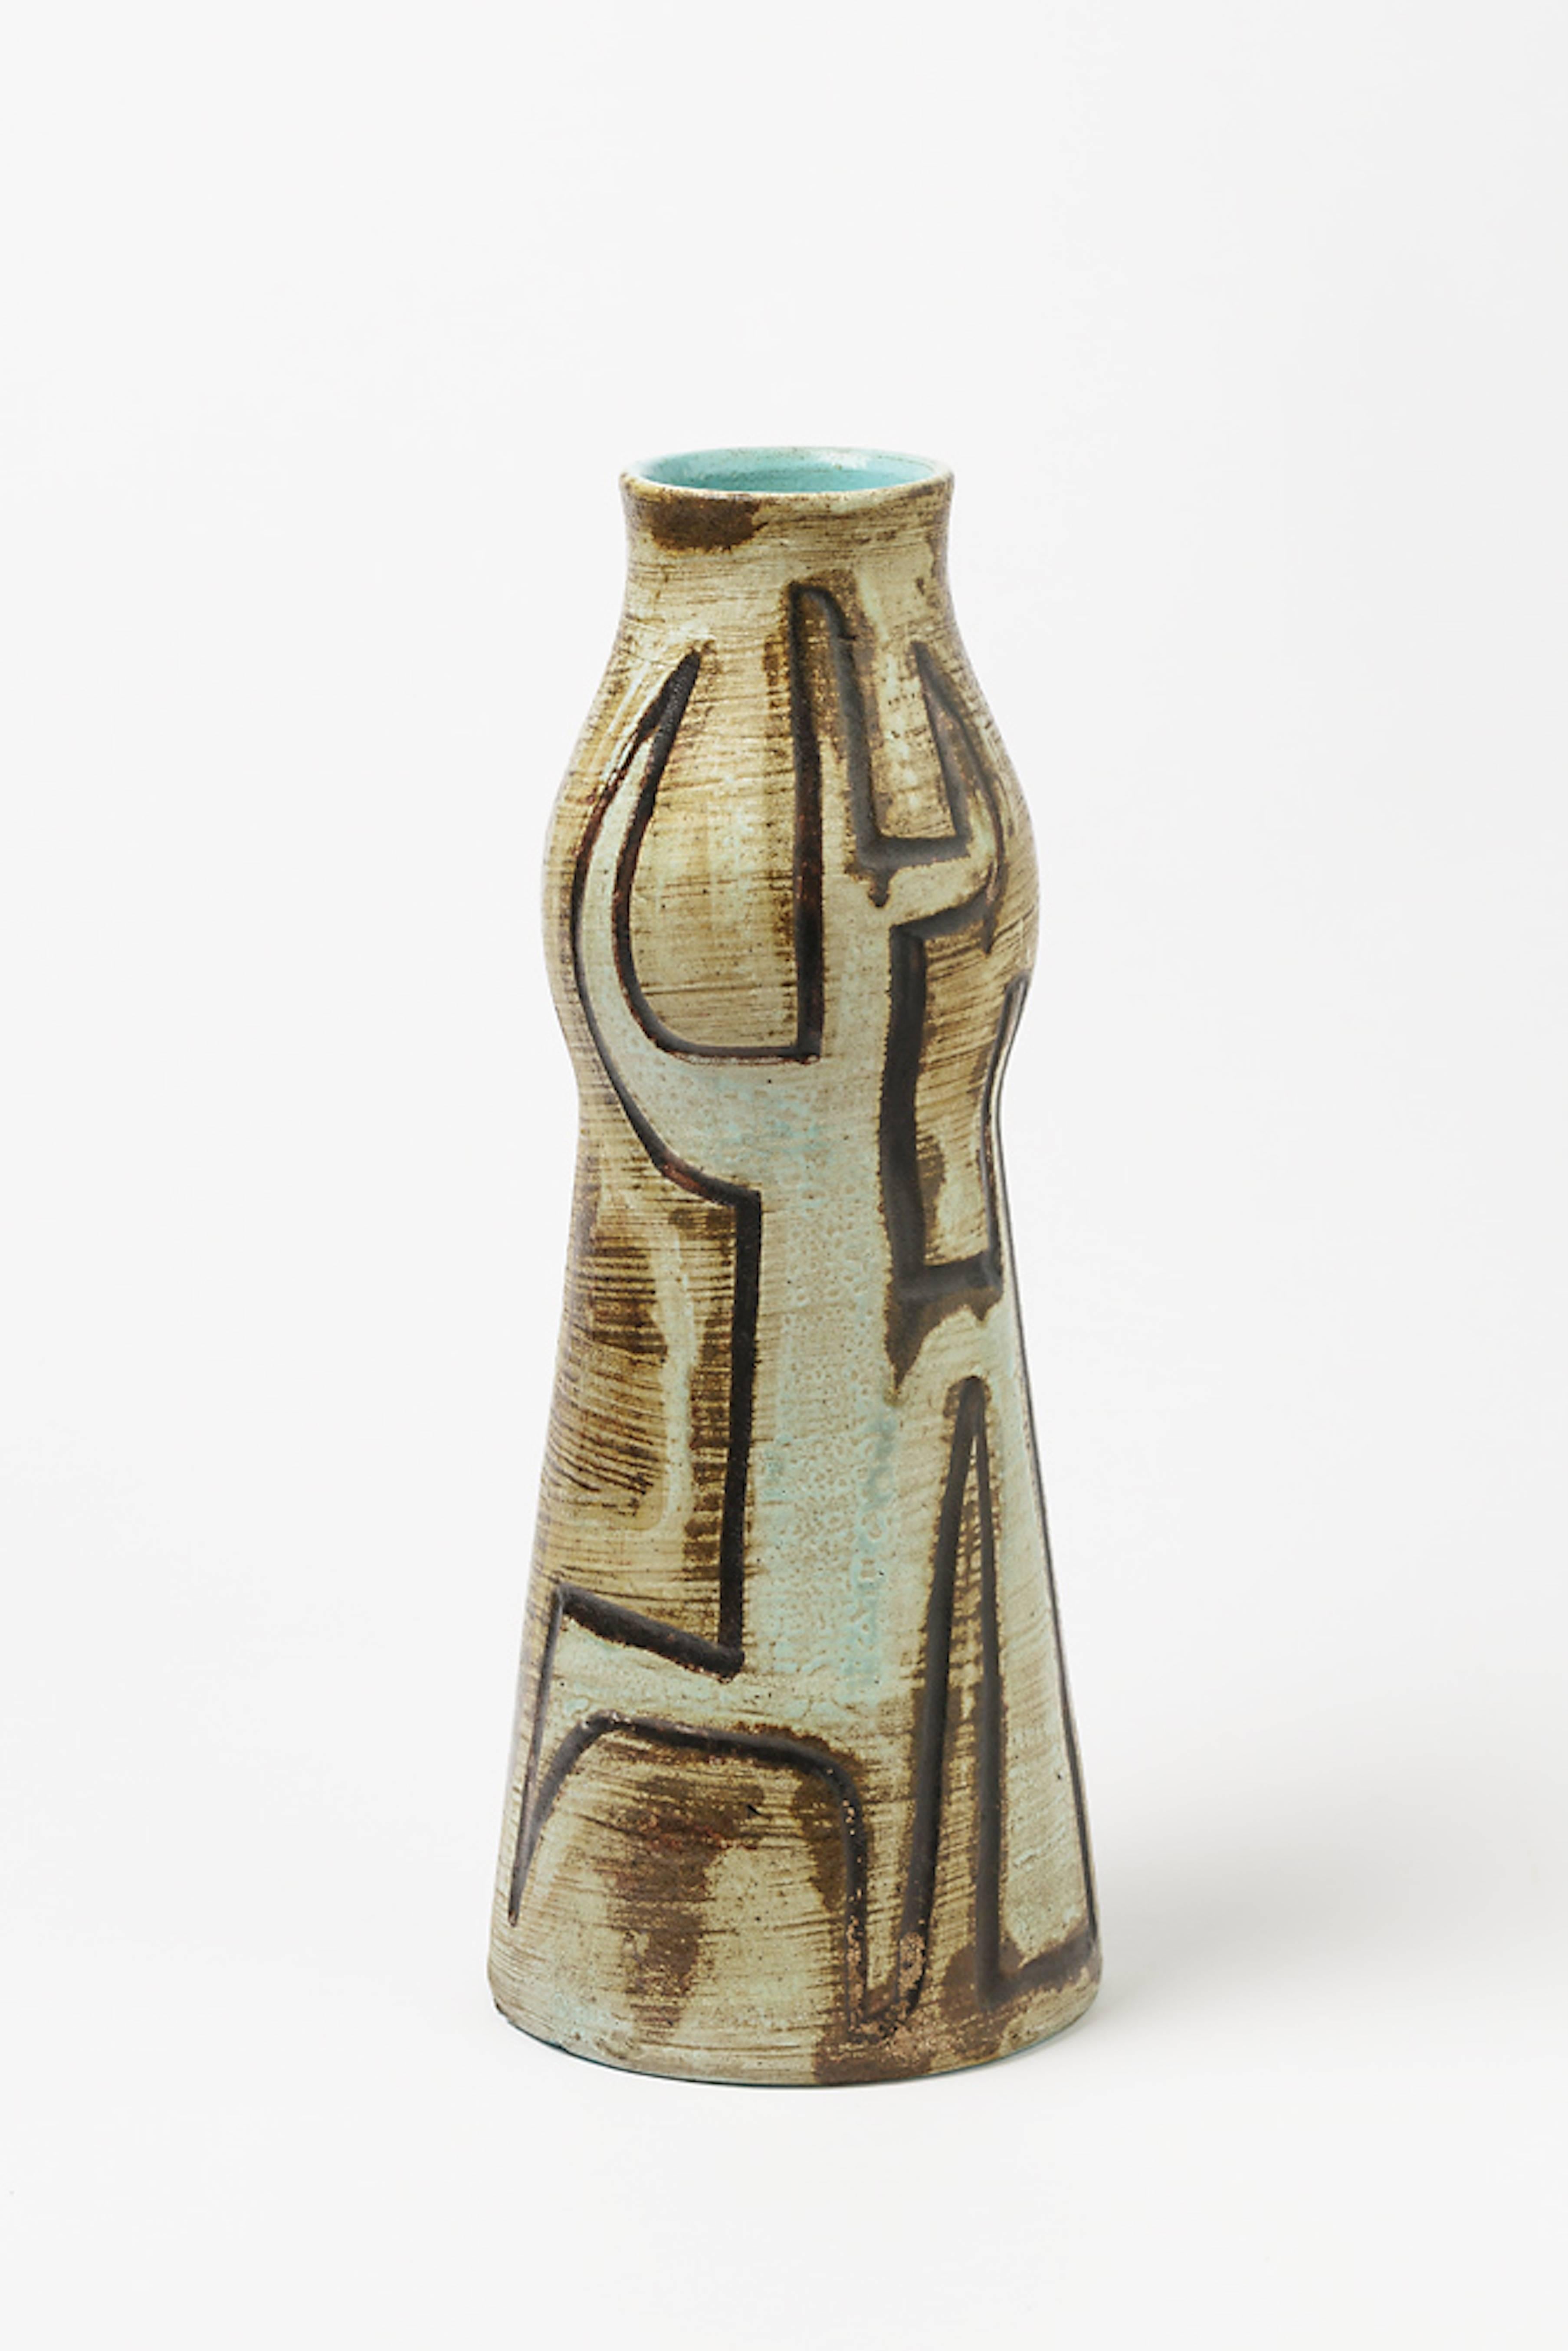 An extraordinary ceramic vase by Accolay with a unique abstract decoration.
Perfect original conditions.
Signed under the base “Accolay,”
circa 1960-1970.